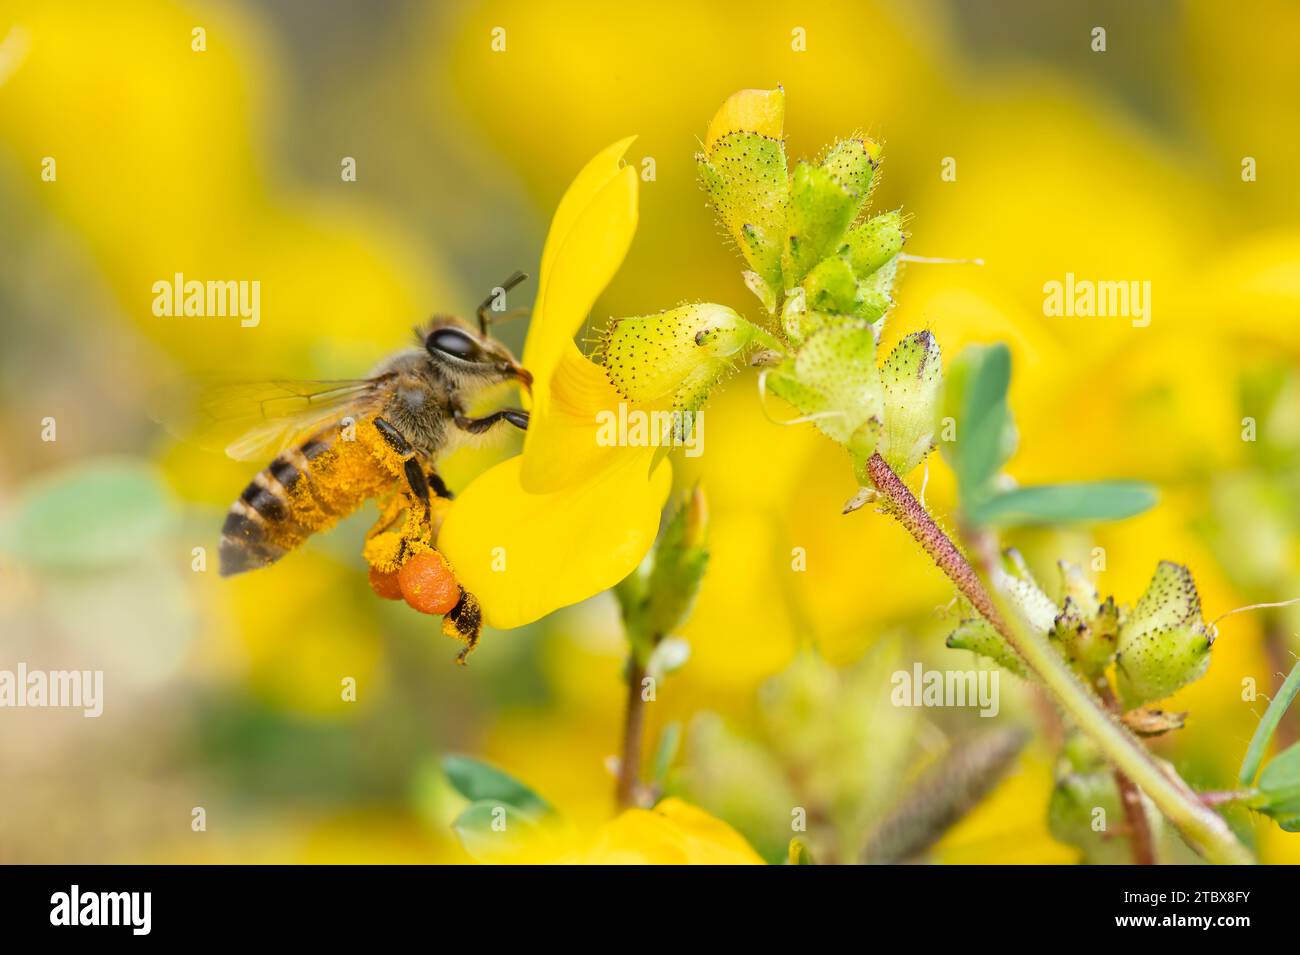 Macro photo of Honey bee collecting honey from Smithia Hirsuta flower which are yellow wild flowers in legume family. Pollen sac of honey bee. Stock Photo